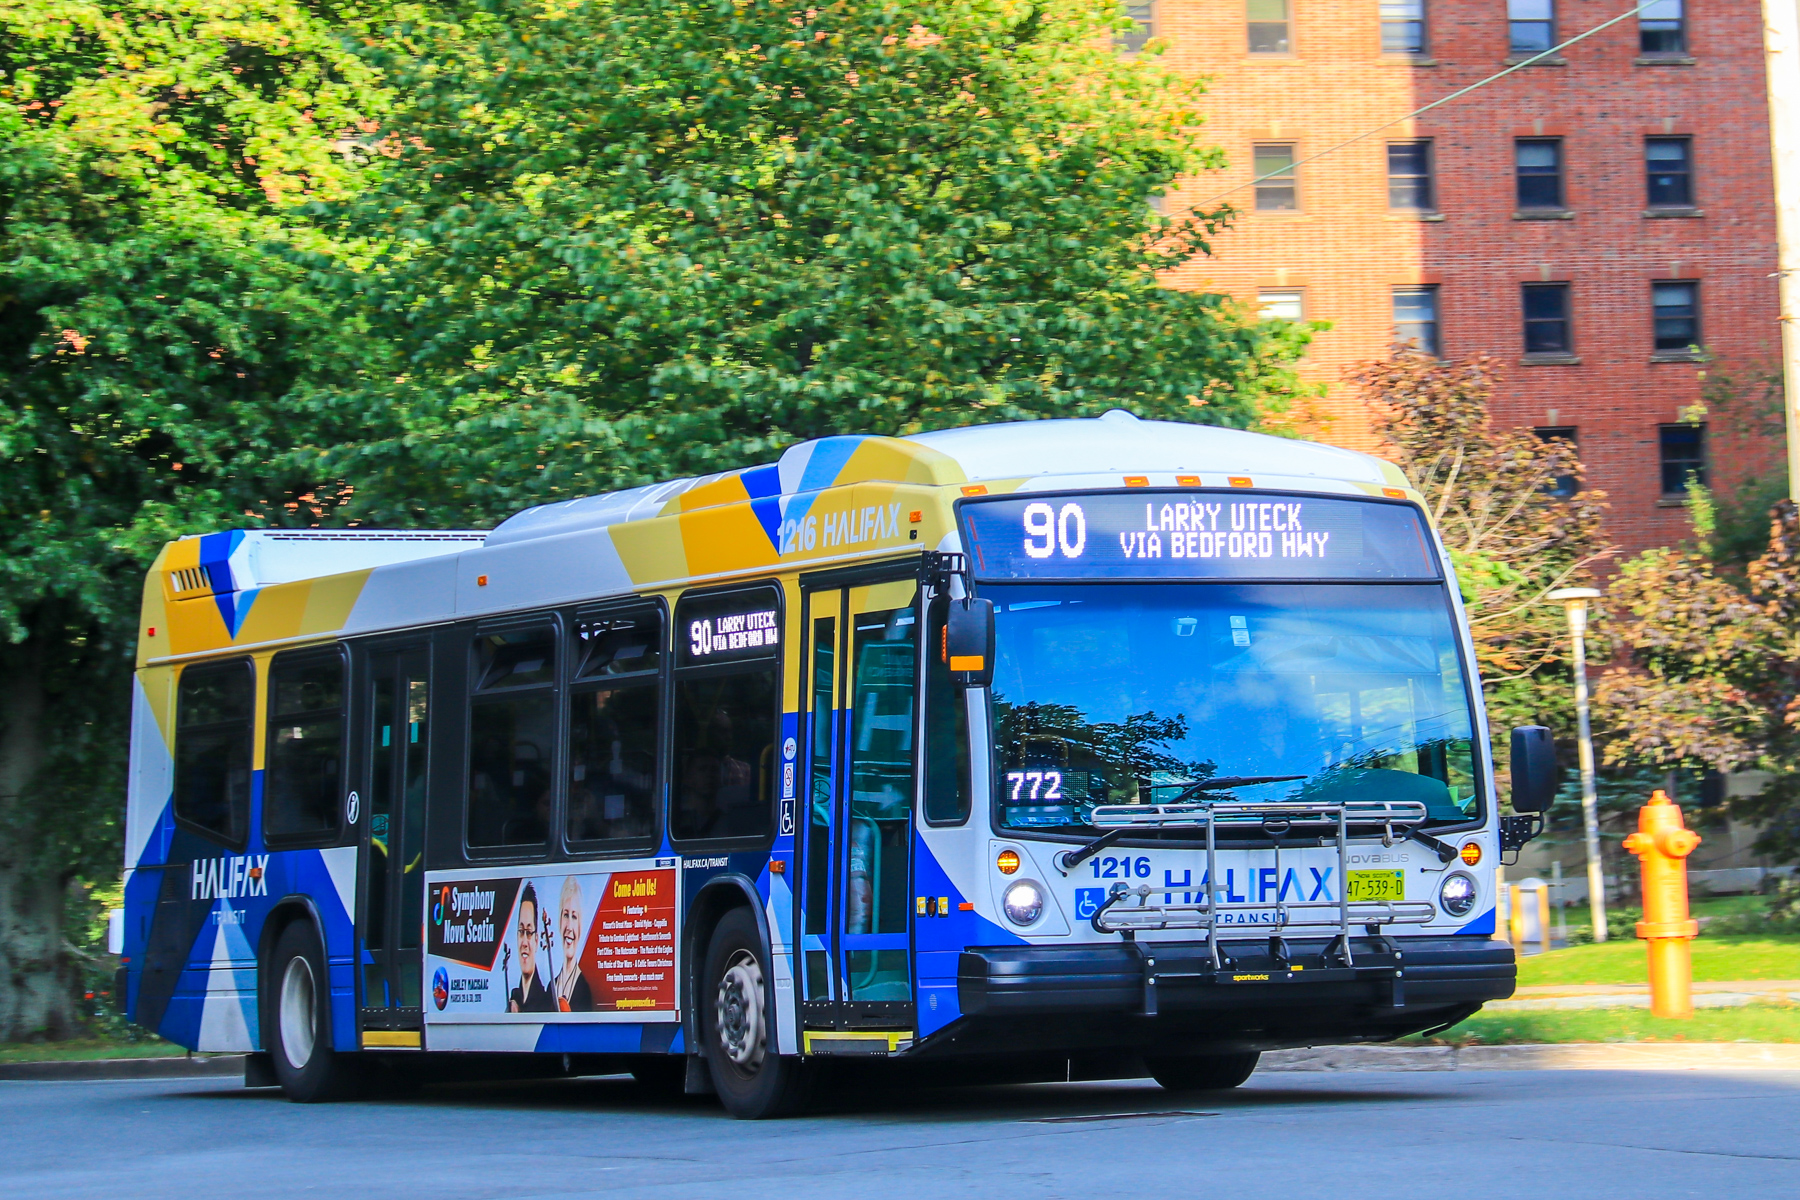 A Halifax Transit bus is shown travelling within the city.